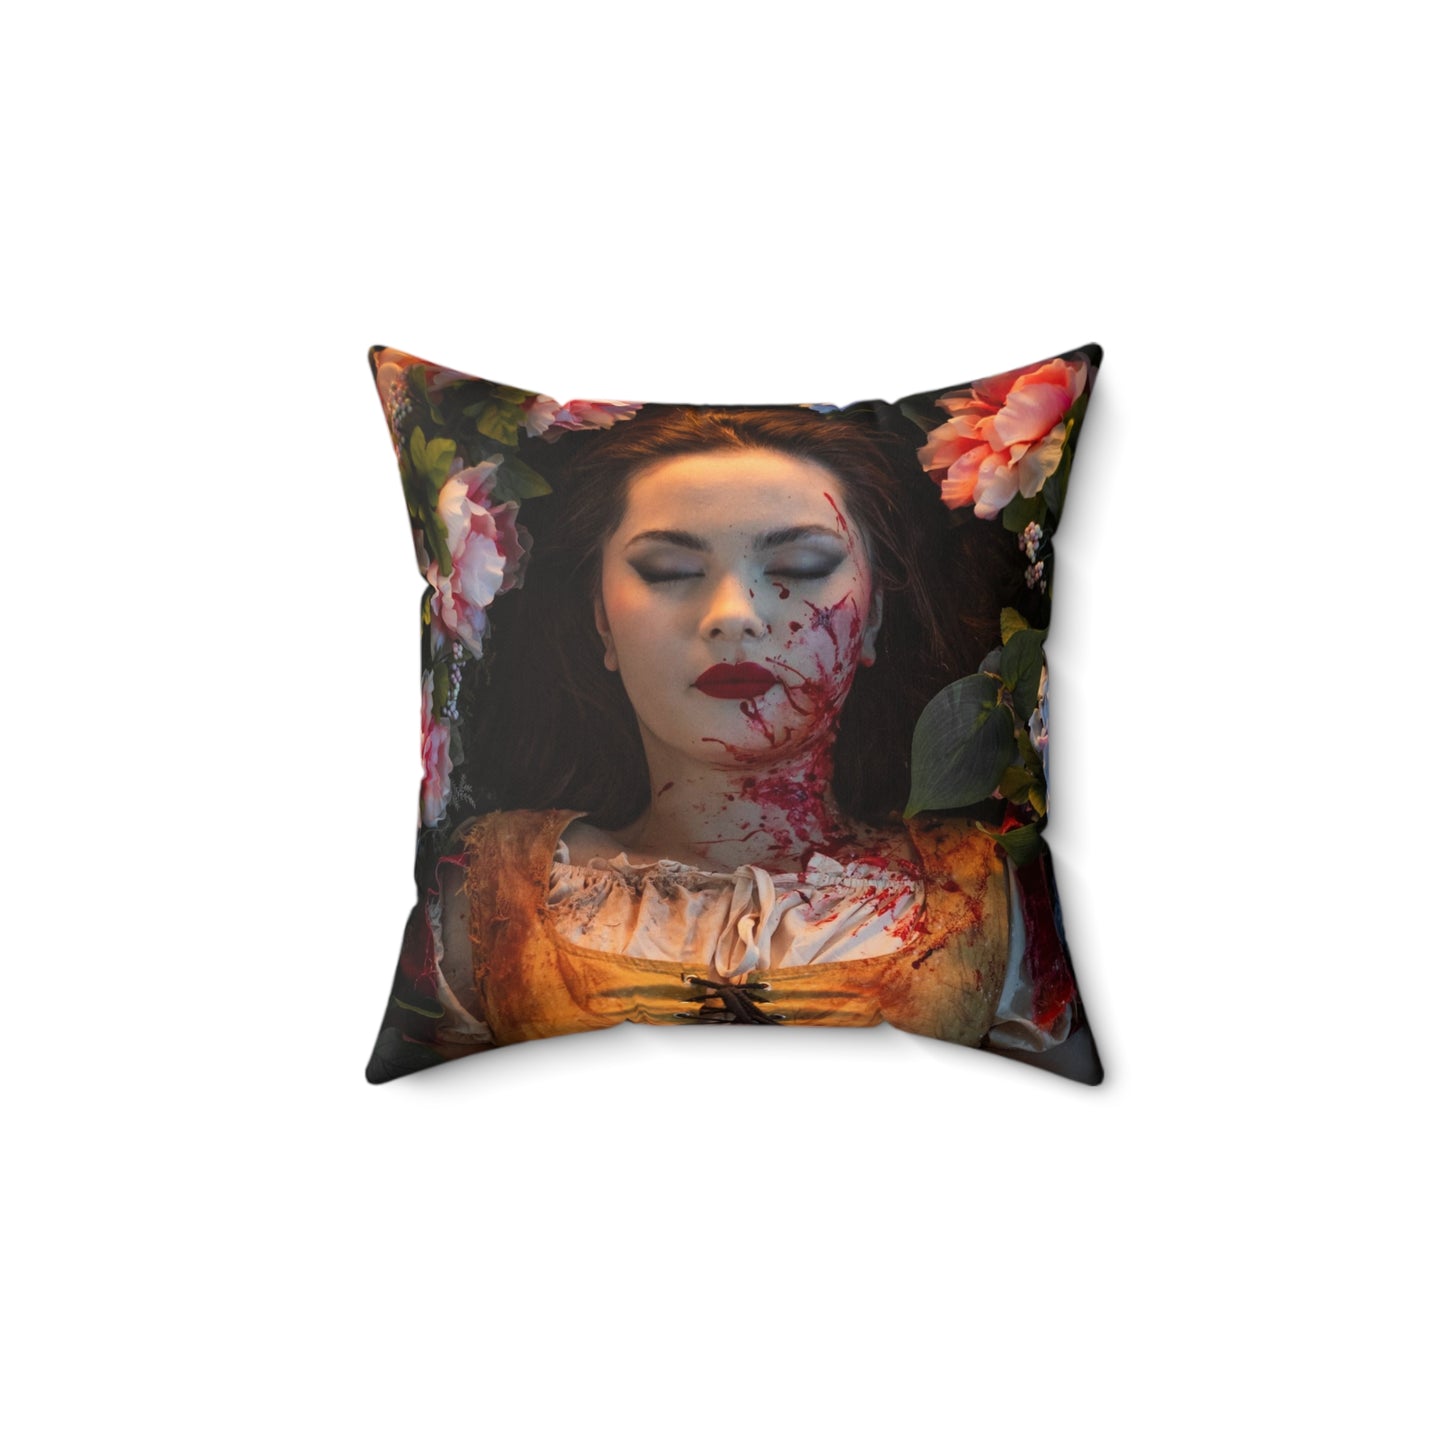 The Death of Snow White Spun Polyester Square Pillow